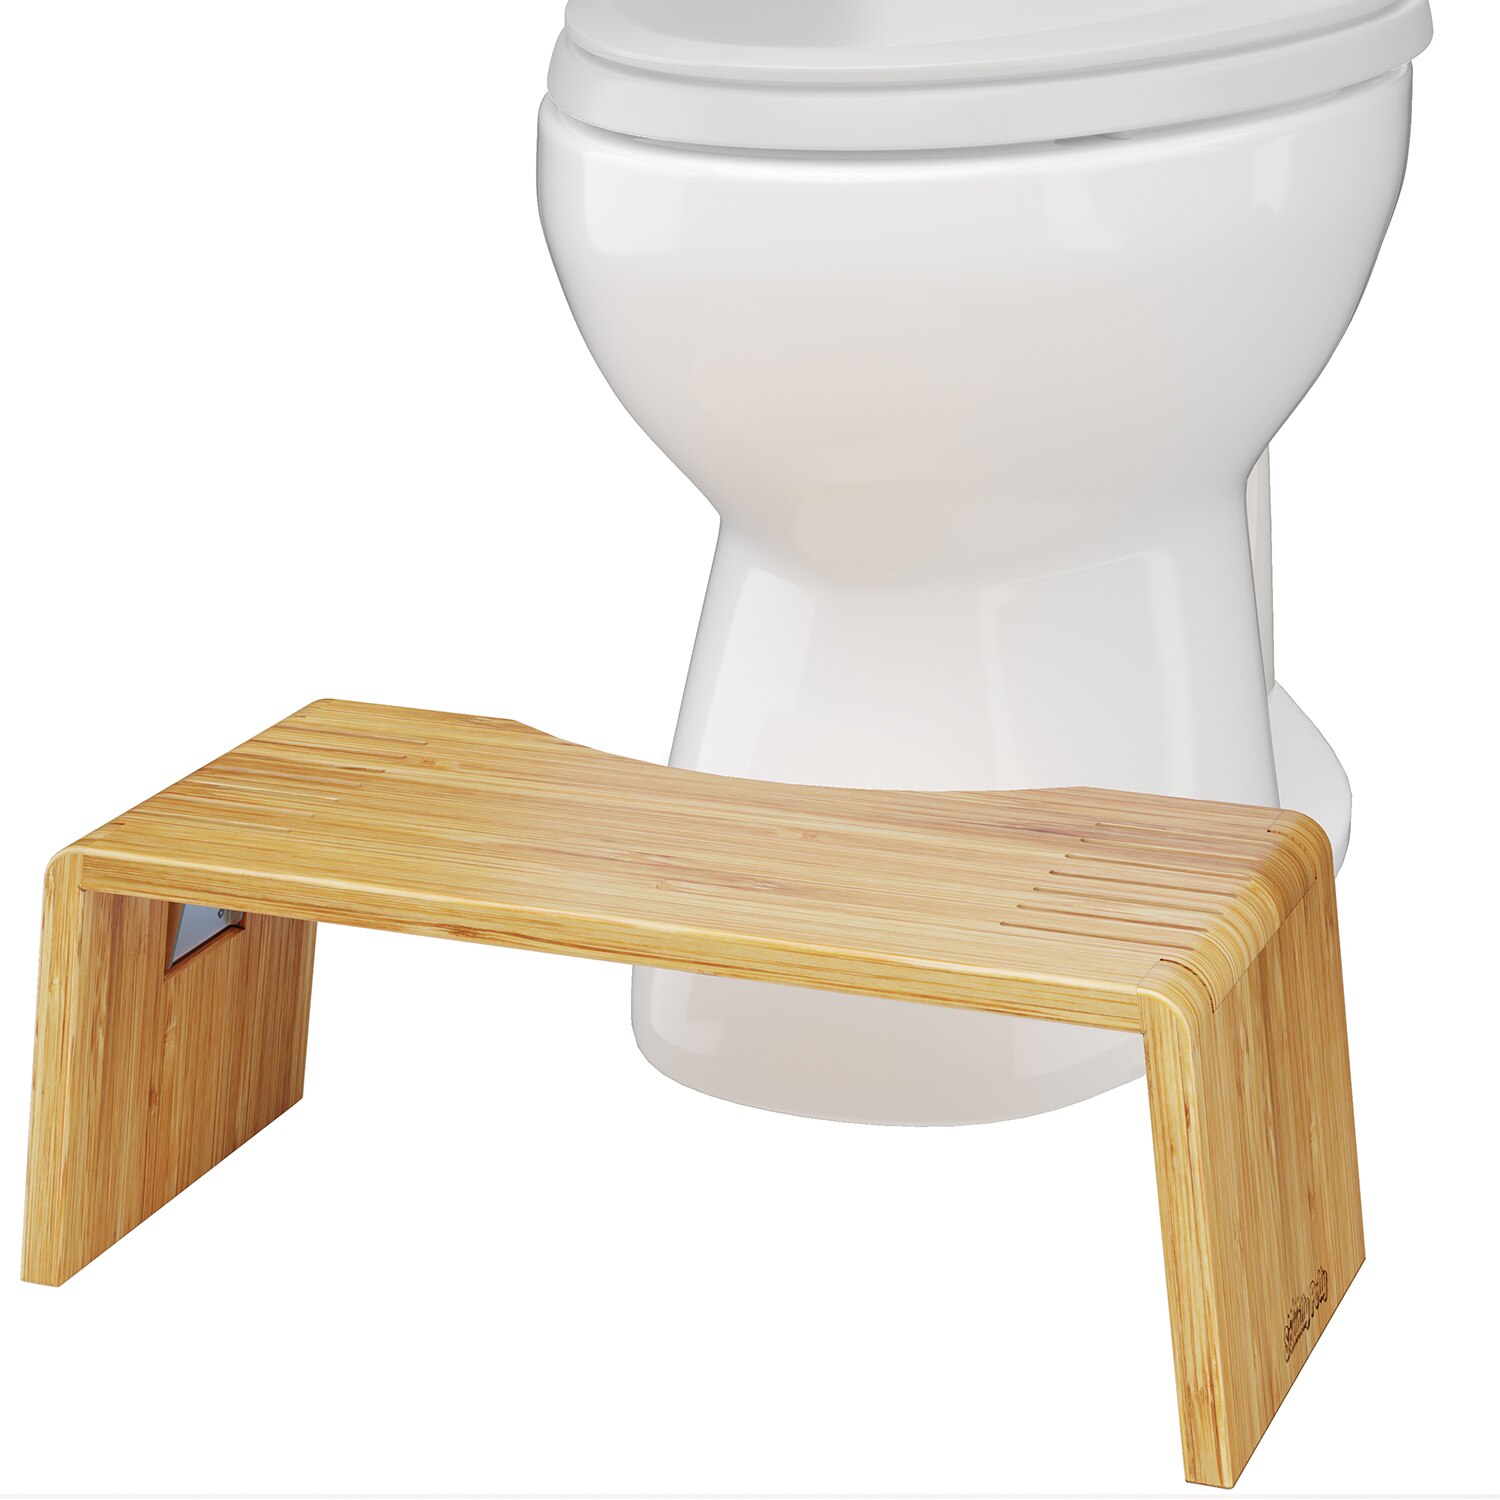 Does the Squatty Potty Really Improve How We Poop?